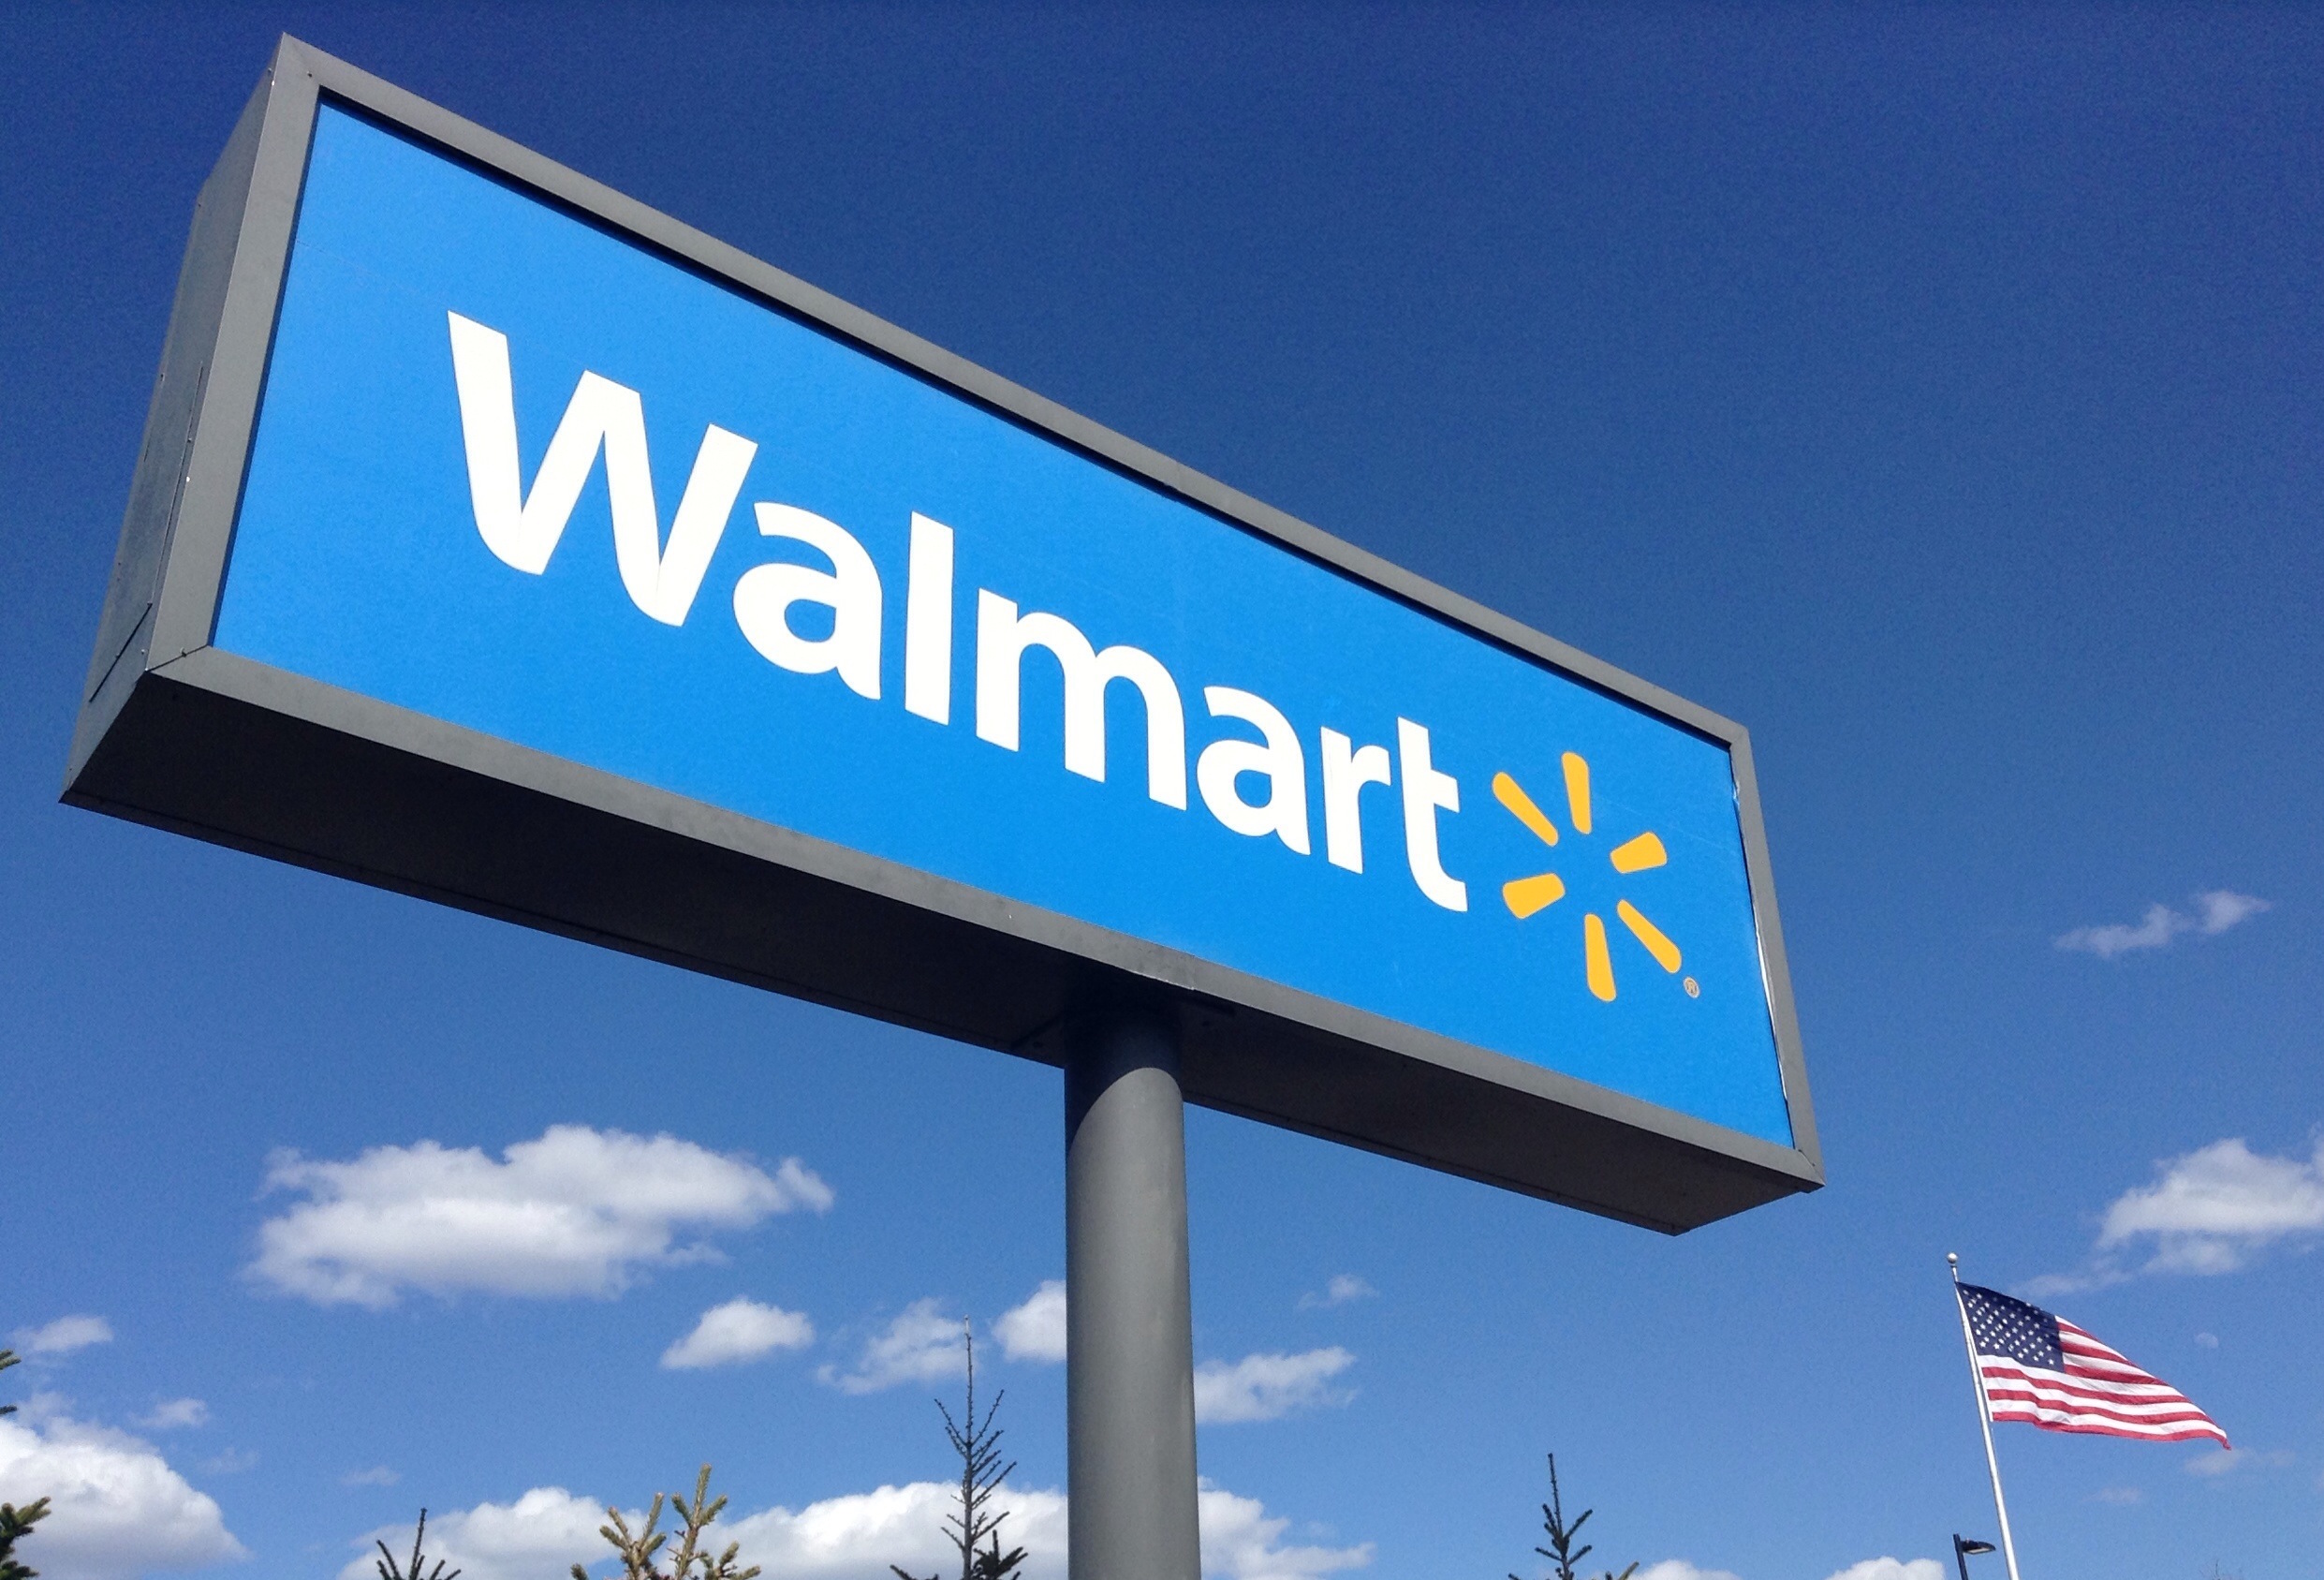 Texas Shopper's Big $100 Million Case Against Walmart Ends Without a Win Here's What Happened